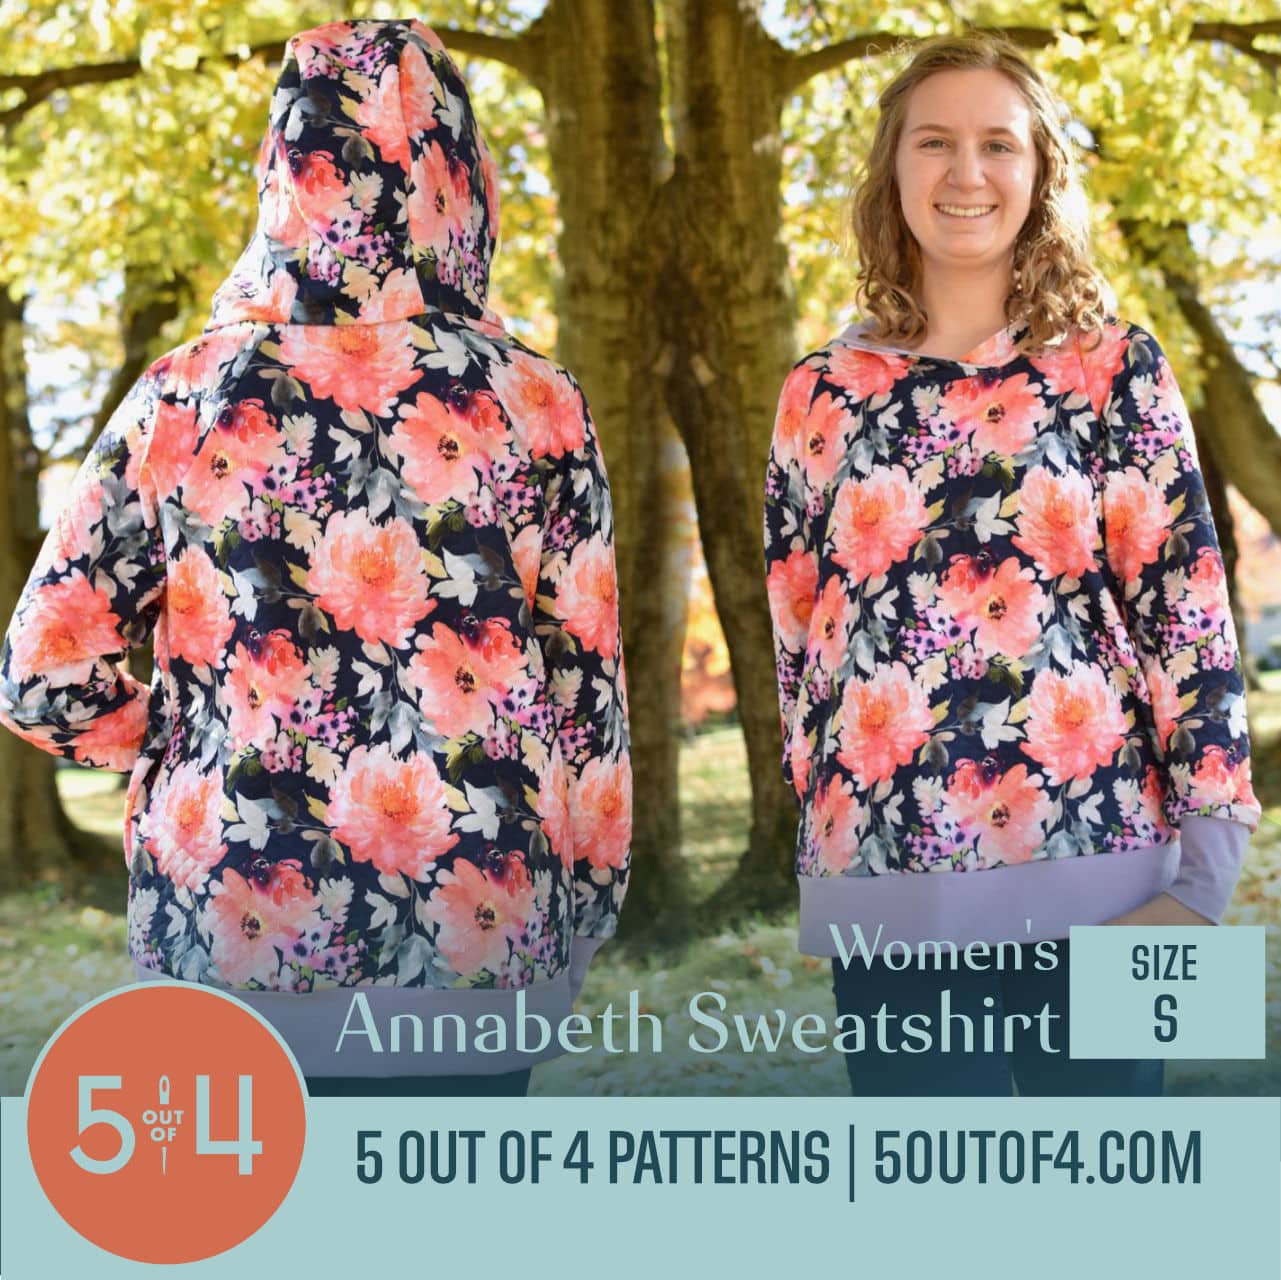 Annabeth Top and Tunic Sweatshirt - 5 out of 4 Patterns